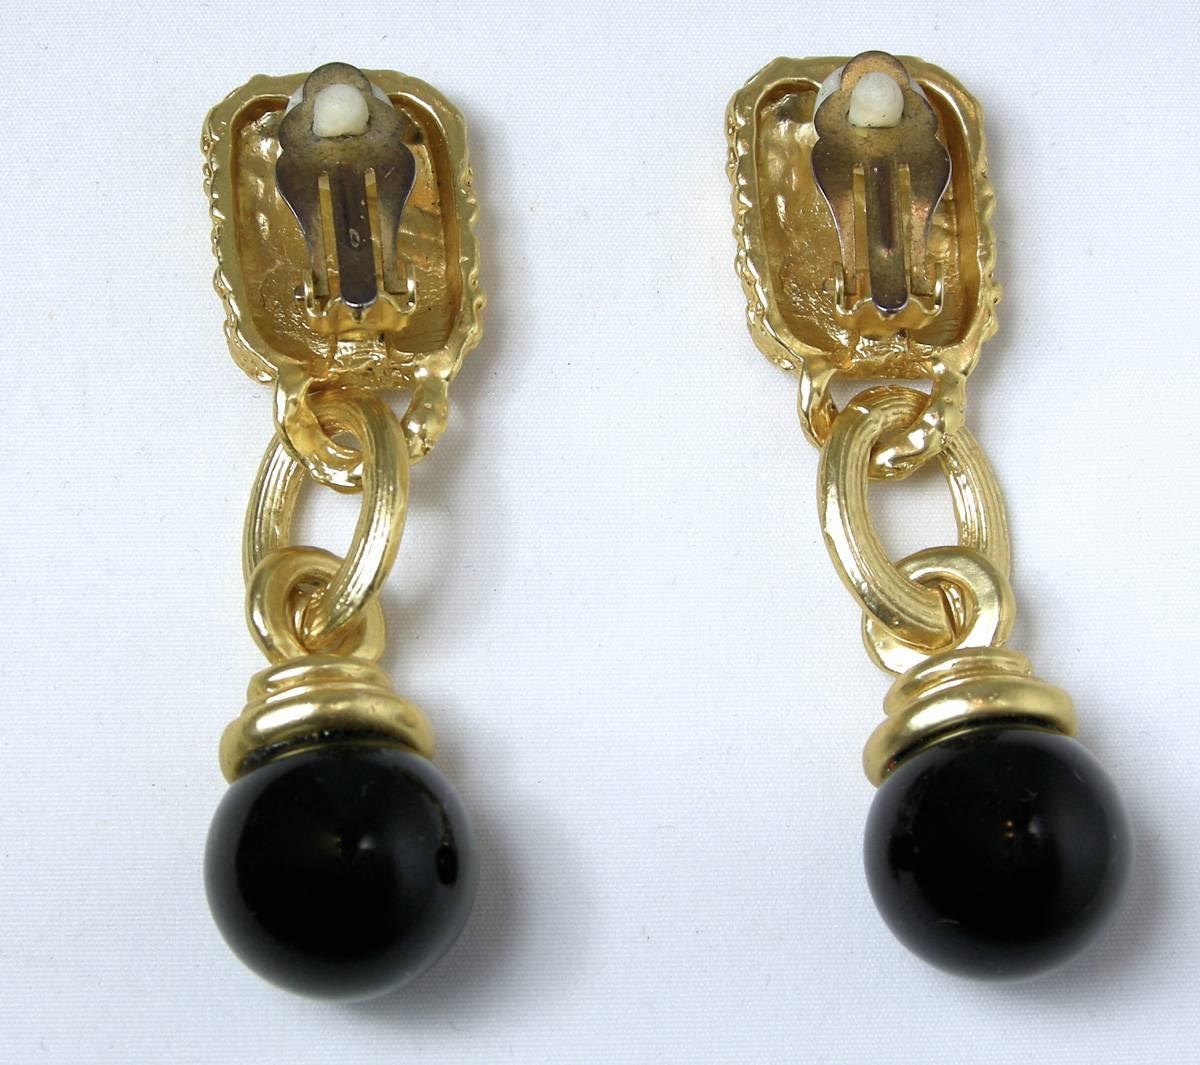 These vintage signed Graziano earrings feature a leopard design with black and topaz color rhinestone in a gold-tone metal setting.  These clip earrings measure 3” x 1” and are signed “Graziano”. They are in excellent condition.
